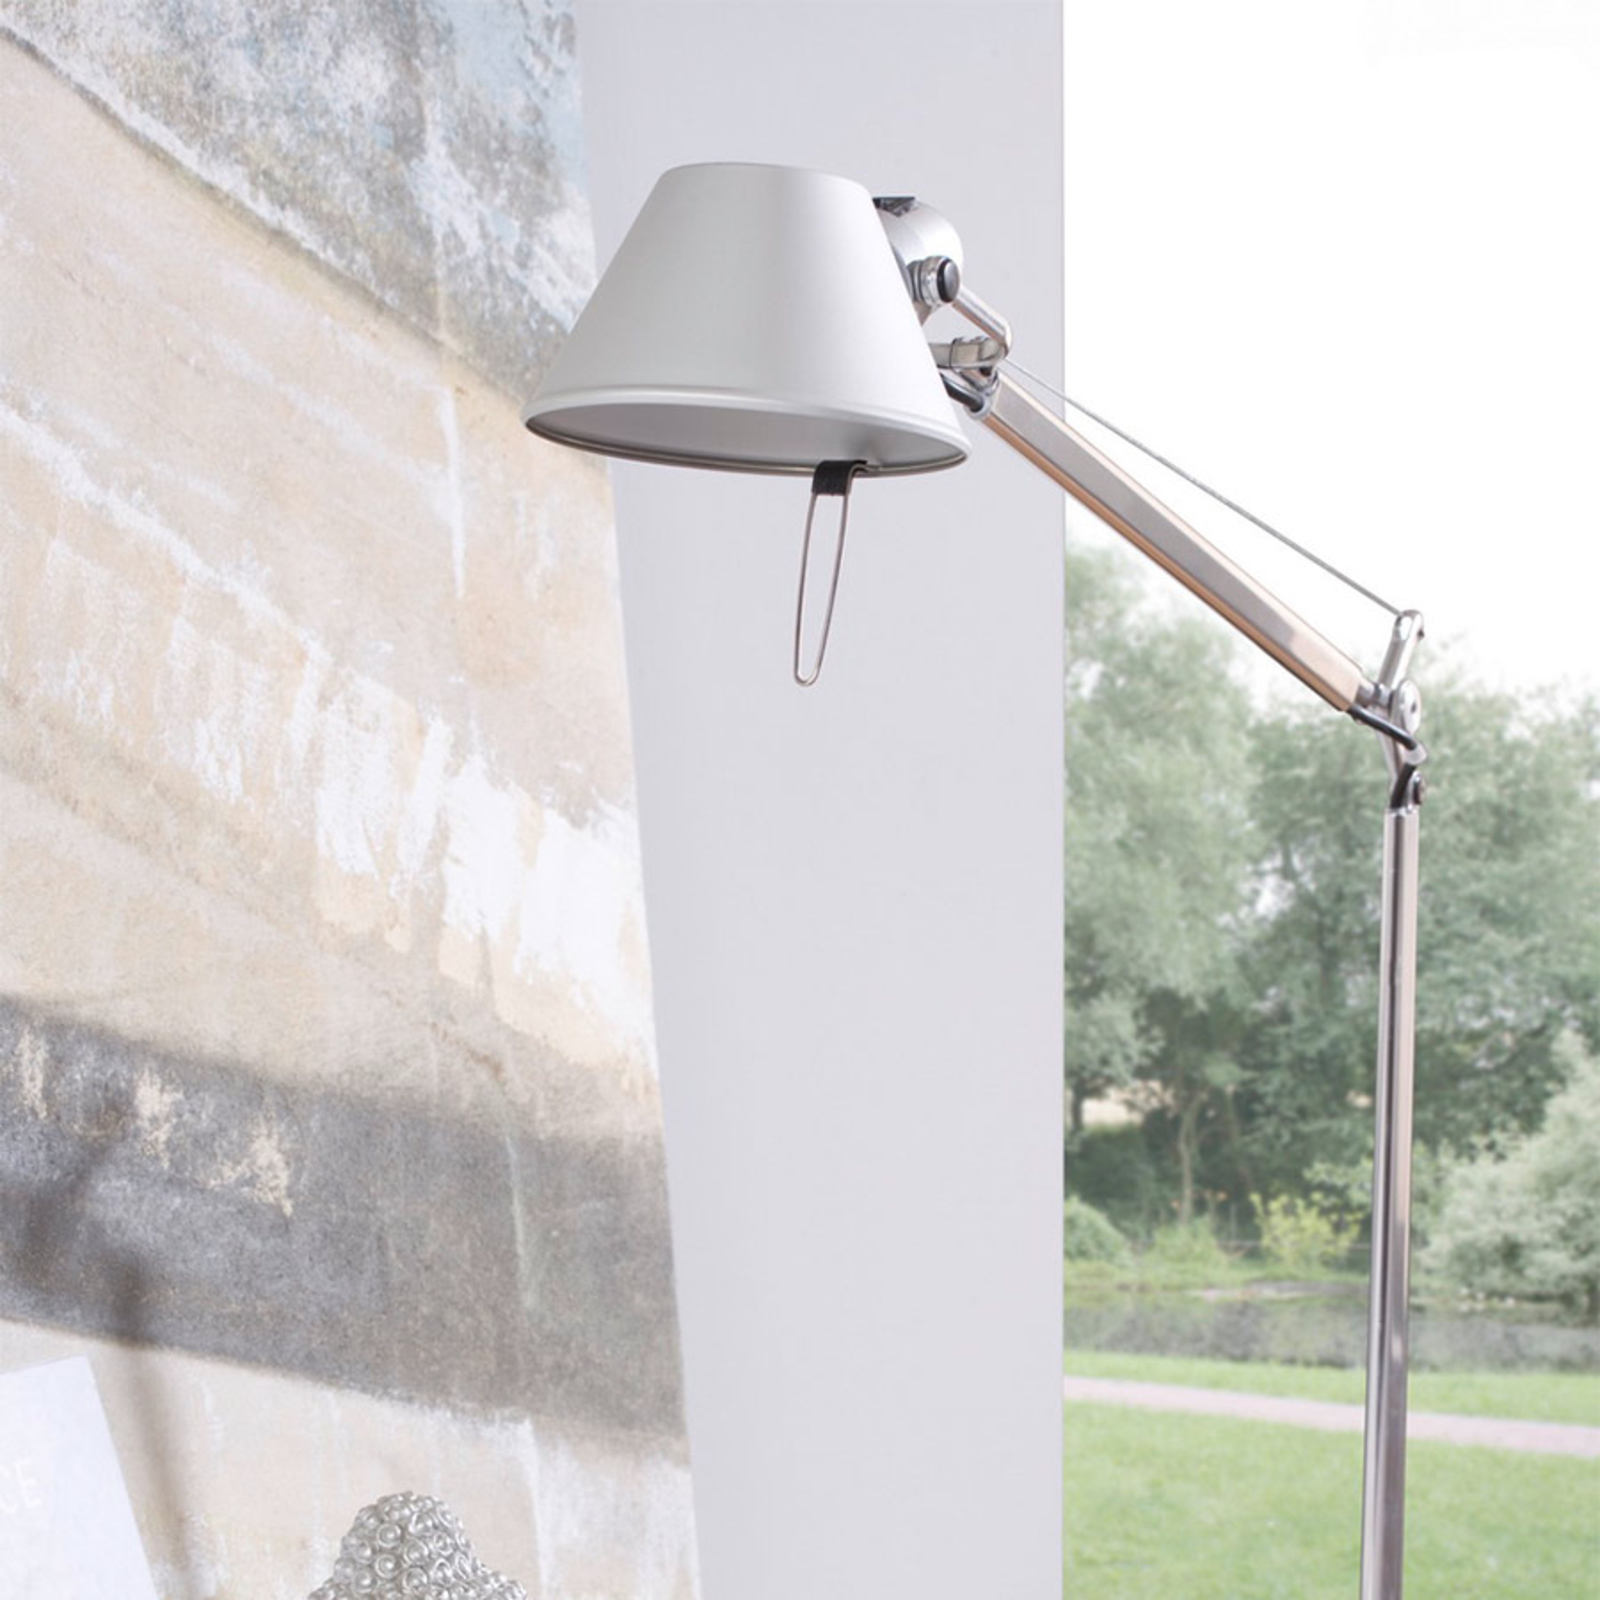 Artemide Tolomeo table lamp with dimmer 2,700 K